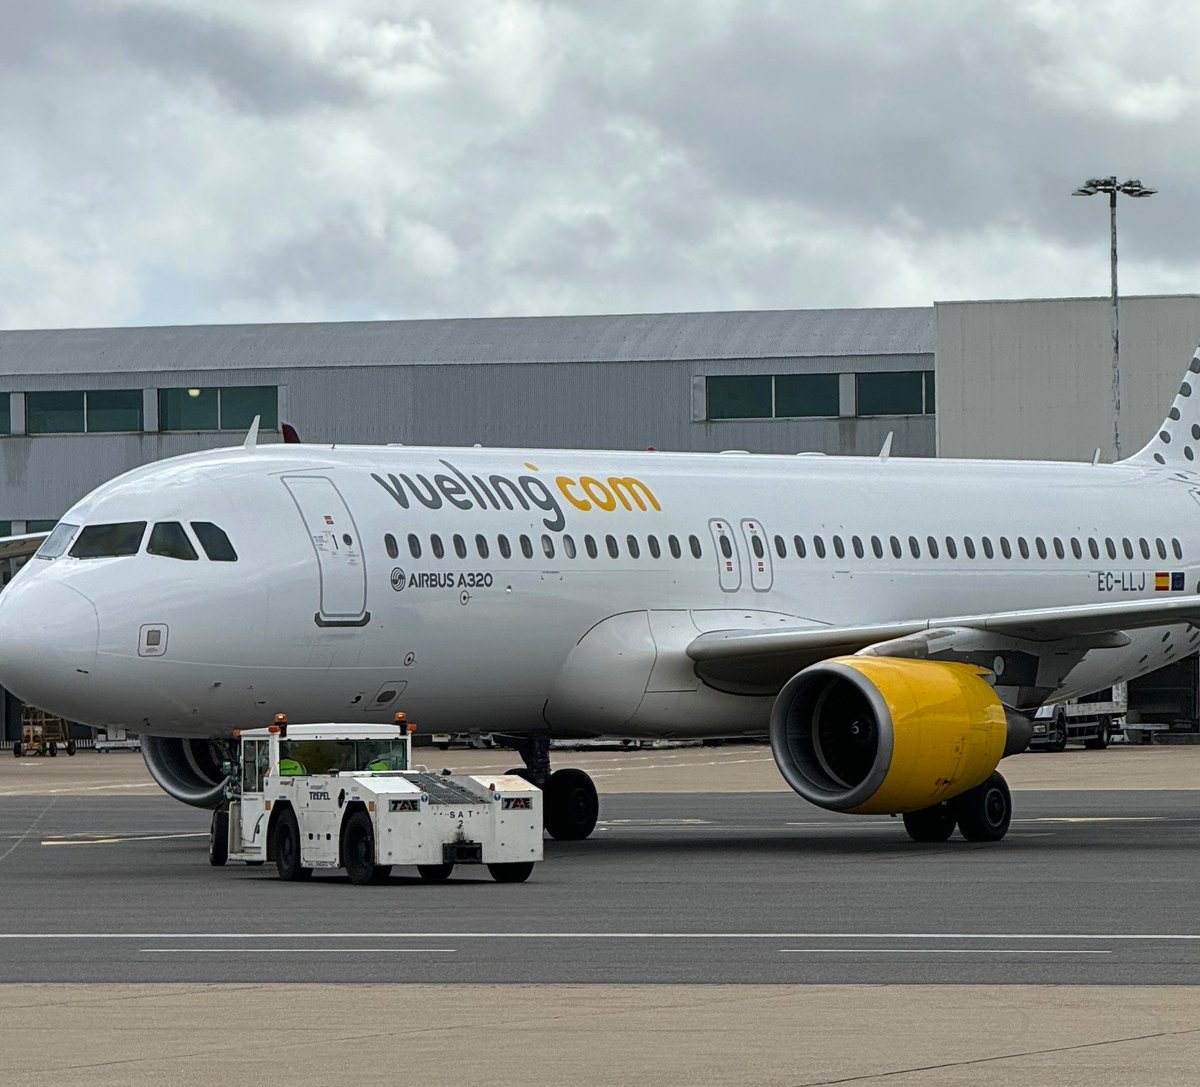 As part of its ongoing commitment to delivering exceptional service and expanding its footprint in London, #Swissport is thrilled to welcome @FlyLoganair and @vueling to its portfolio of esteemed airline customers at @HeathrowAirport👉 cutt.ly/bw7tWjCd 🇬🇧 @StatMediaNews